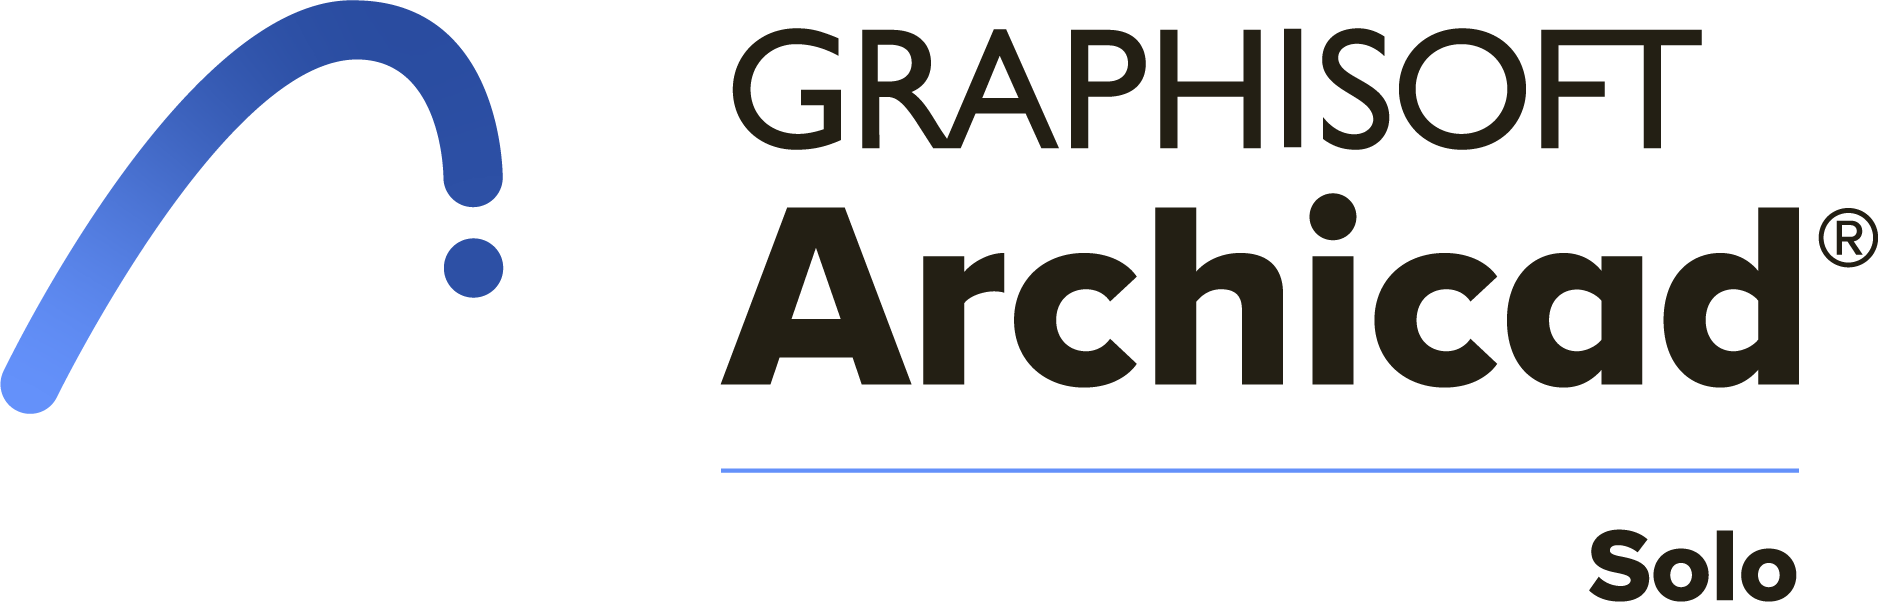 Archicad Solo logo image is to serve as a visual representation of the Archicad Solo brand. It aims to communicate the identity and essence of the software, which is a standalone version of Archicad tailored for individual users or small teams. The logo's design, with its modern and professional appearance, aims to convey reliability, efficiency, and innovation in building information modeling (BIM) software. It serves as a recognizable symbol that users can associate with Archicad Solo and its features, helping to establish brand recognition and trust among architects, designers, and other industry professionals.